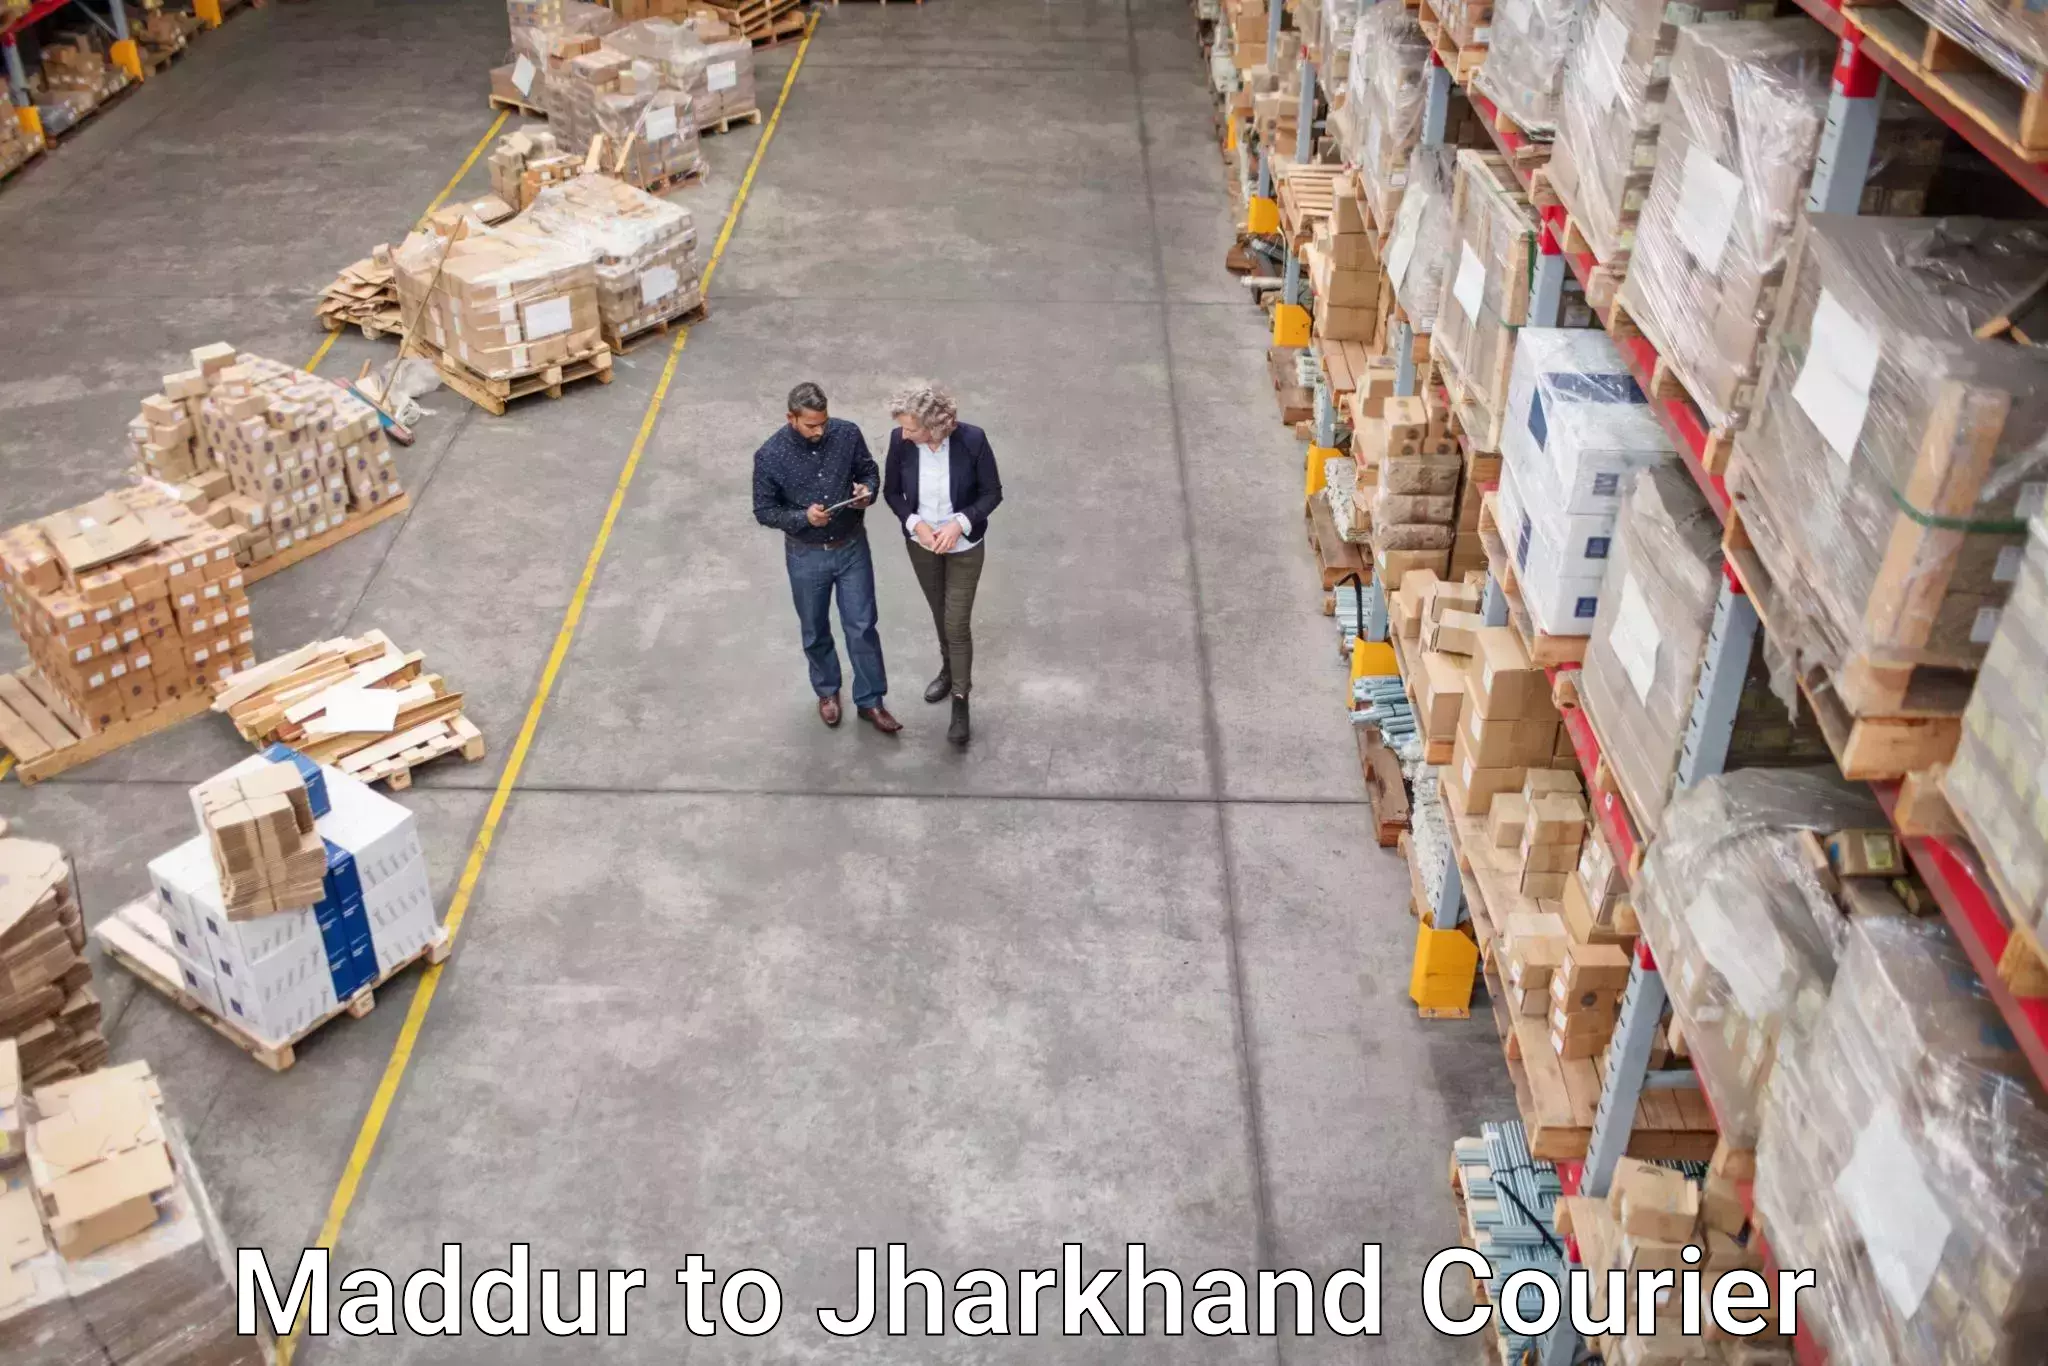 Reliable courier services in Maddur to Jamshedpur